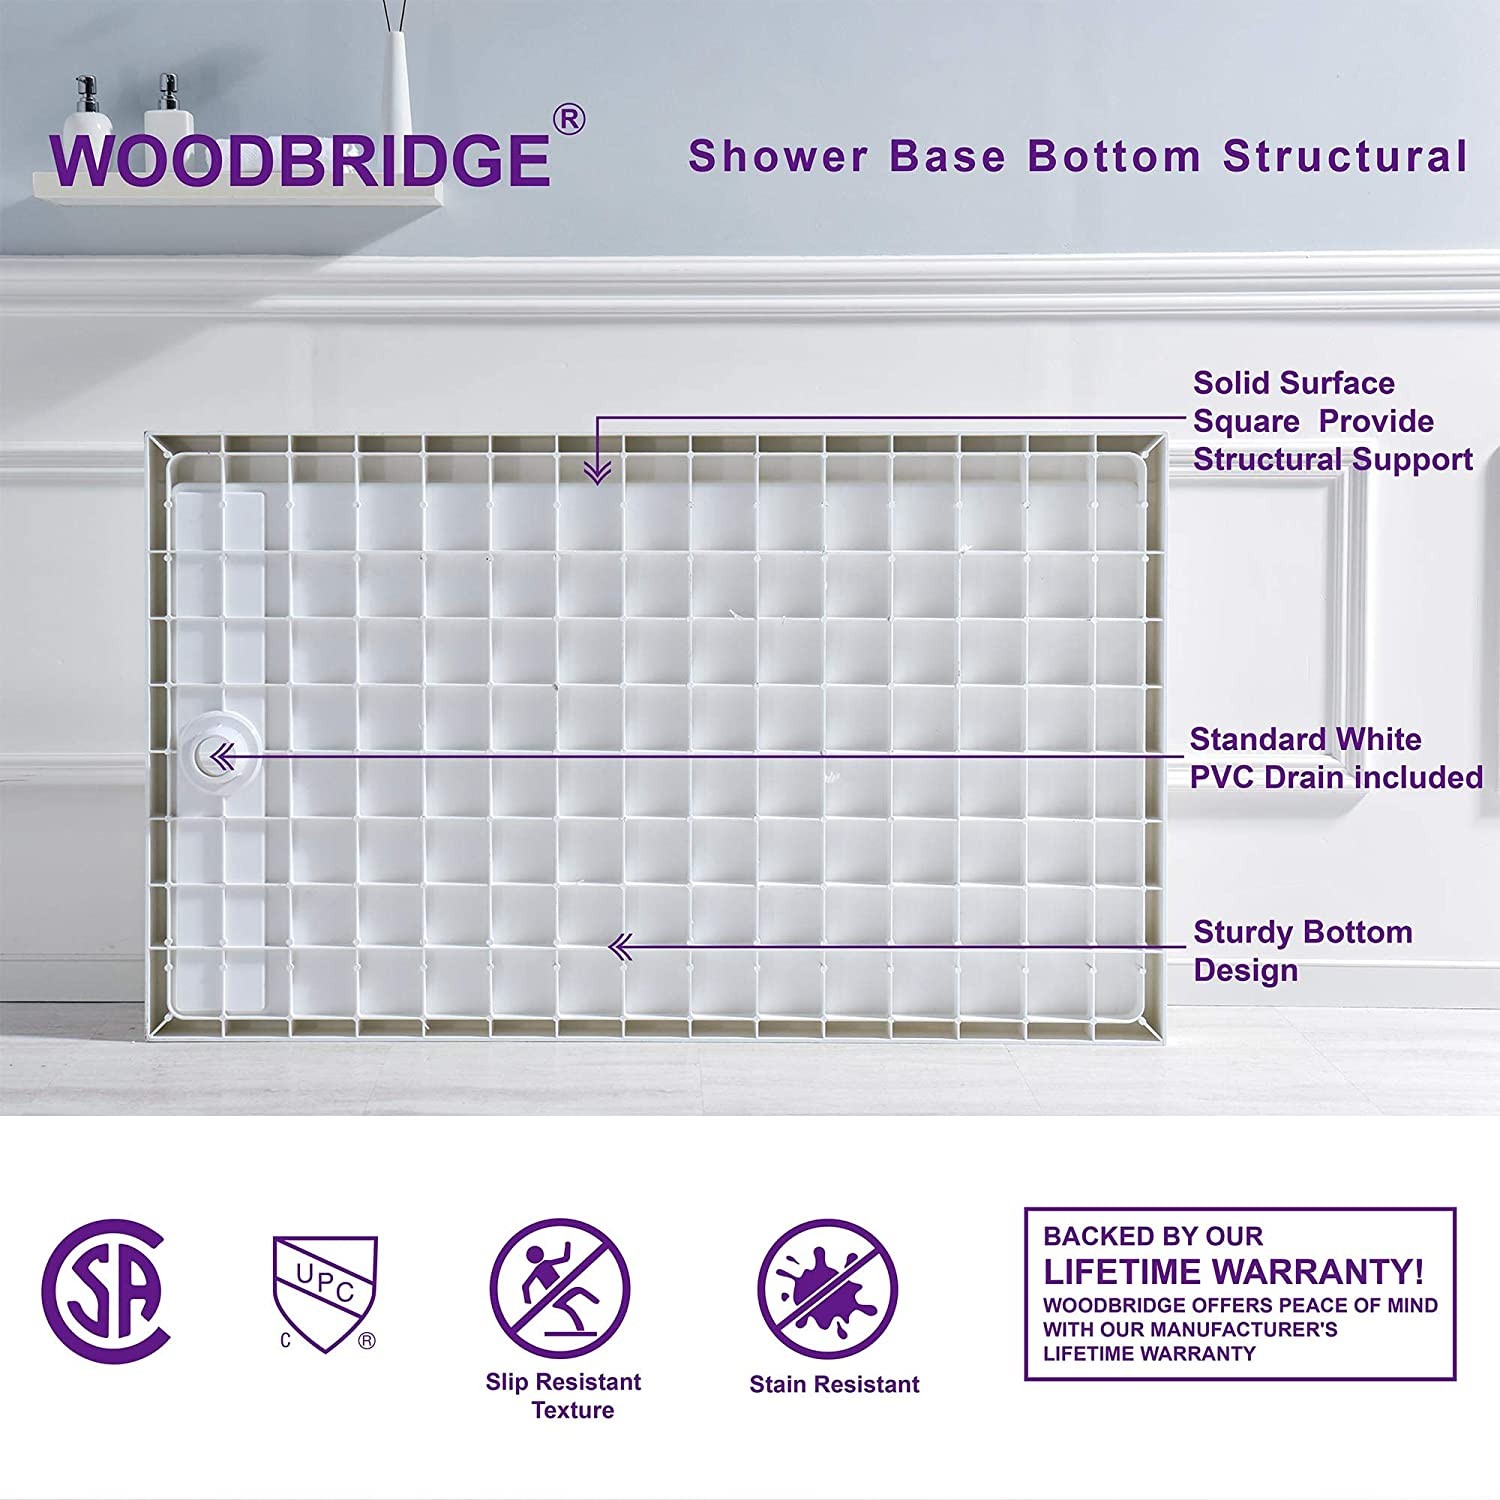  WOODBRIDGE SBR6036-1000L-MB SolidSurface Shower Base with Recessed Trench Side Including Matte Black Linear Cover, 60